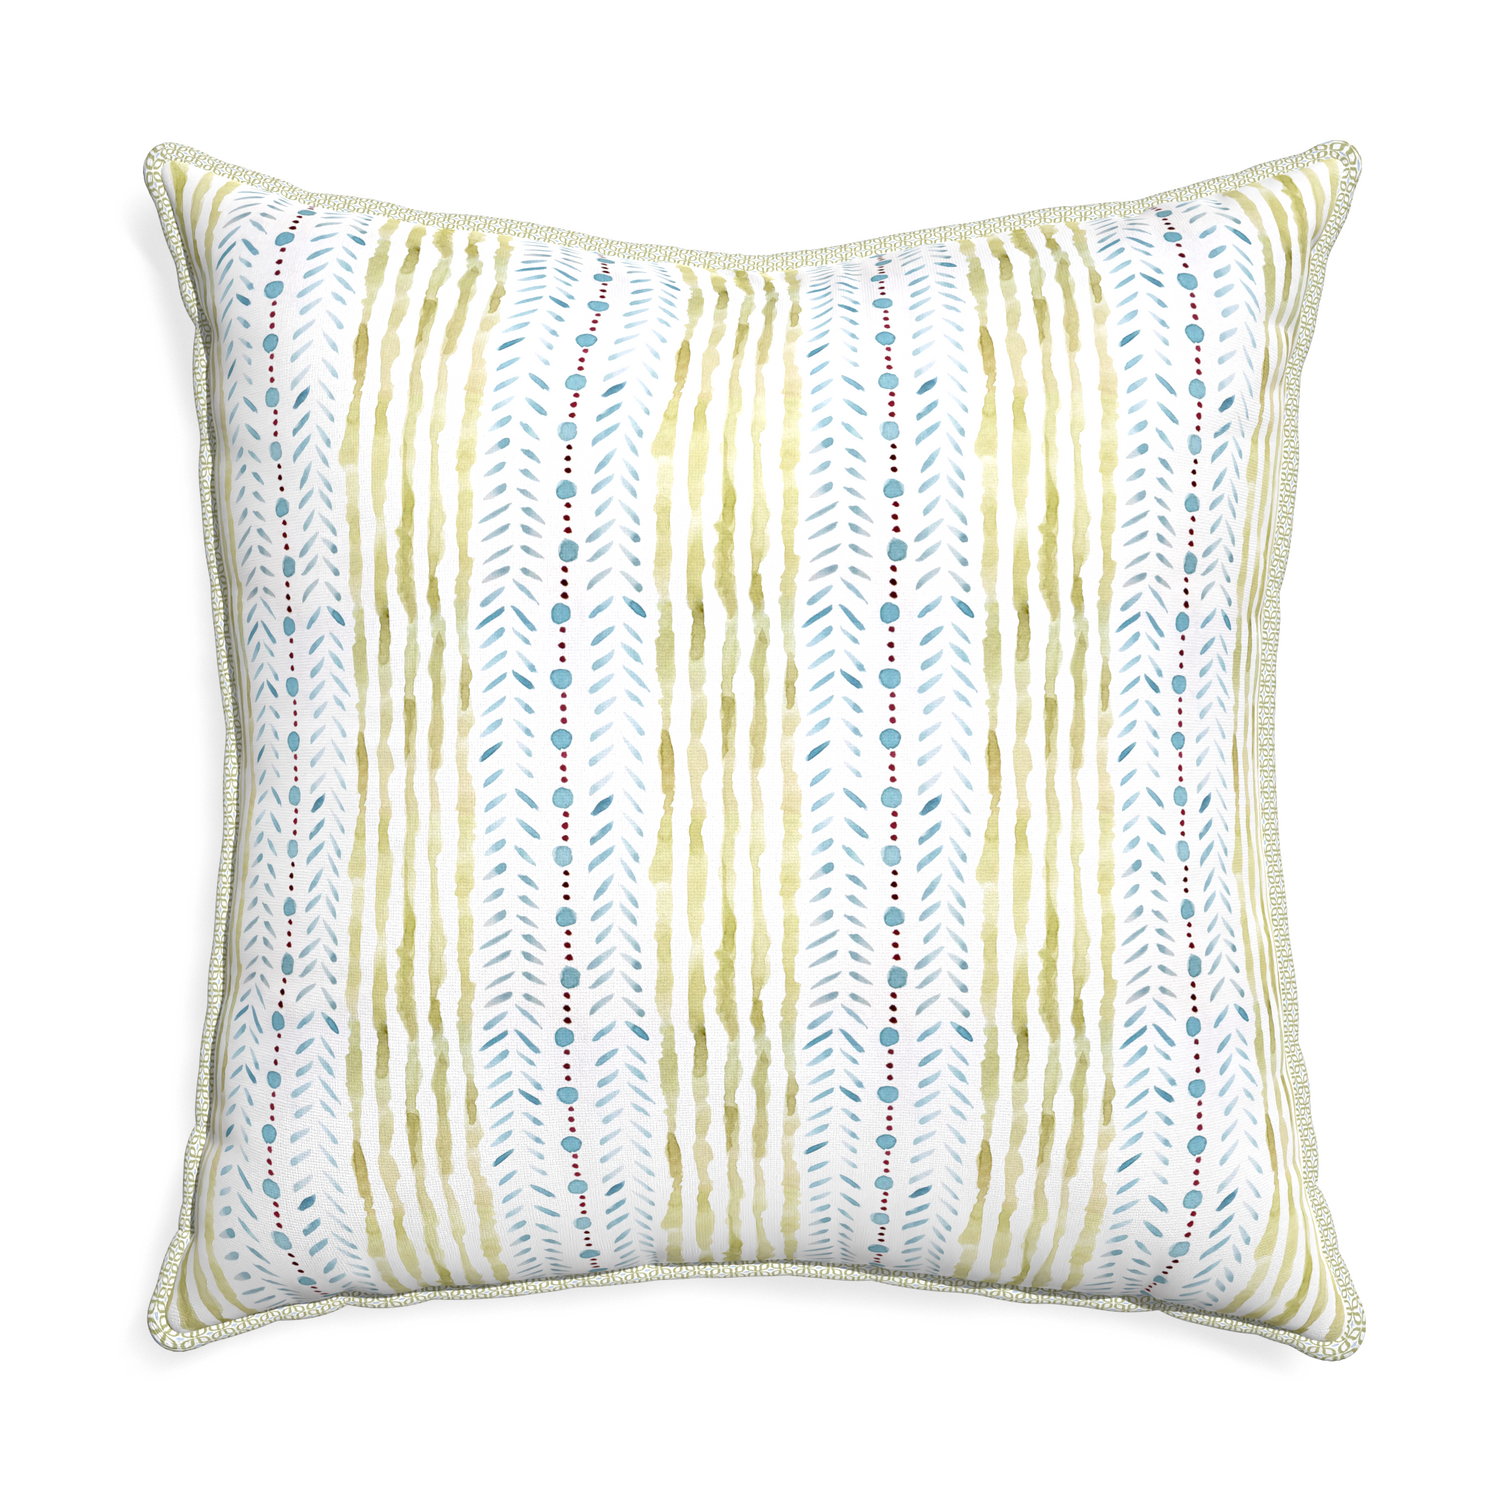 Euro-sham julia custom blue & green stripedpillow with l piping on white background